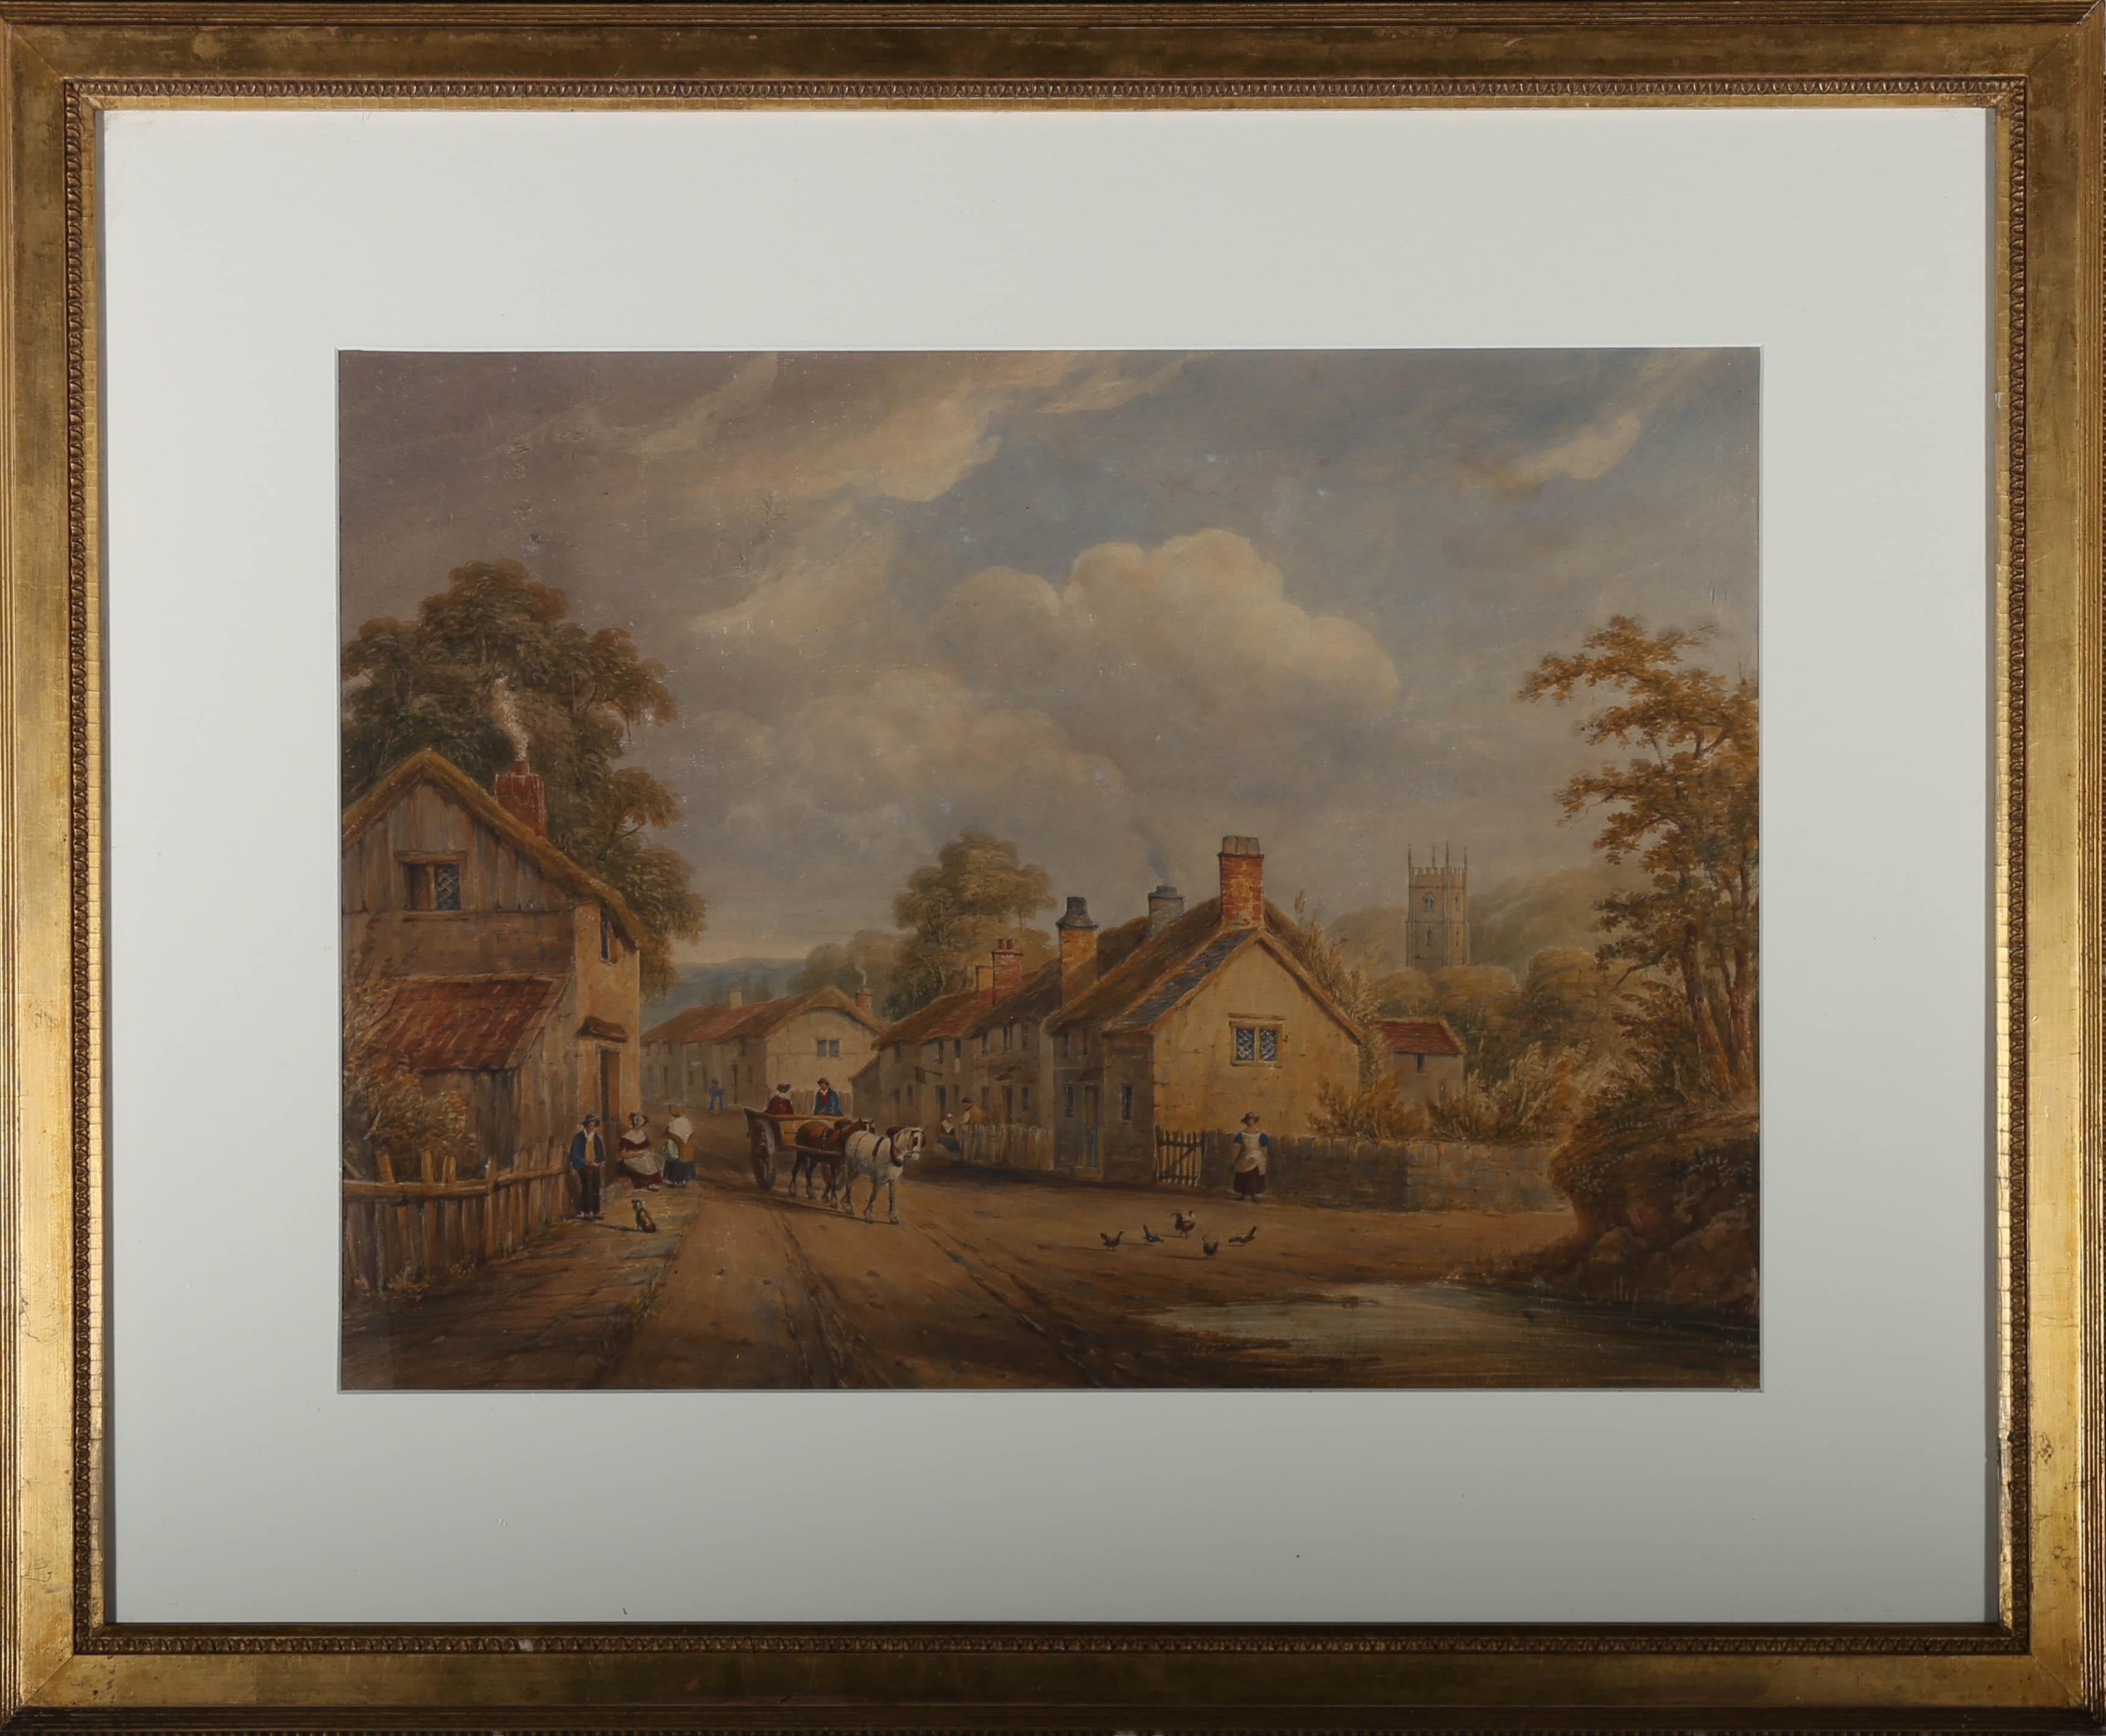 Unknown Landscape Art - Framed Mid 19th Century Watercolour - Village Scene with Horse Drawn Cart